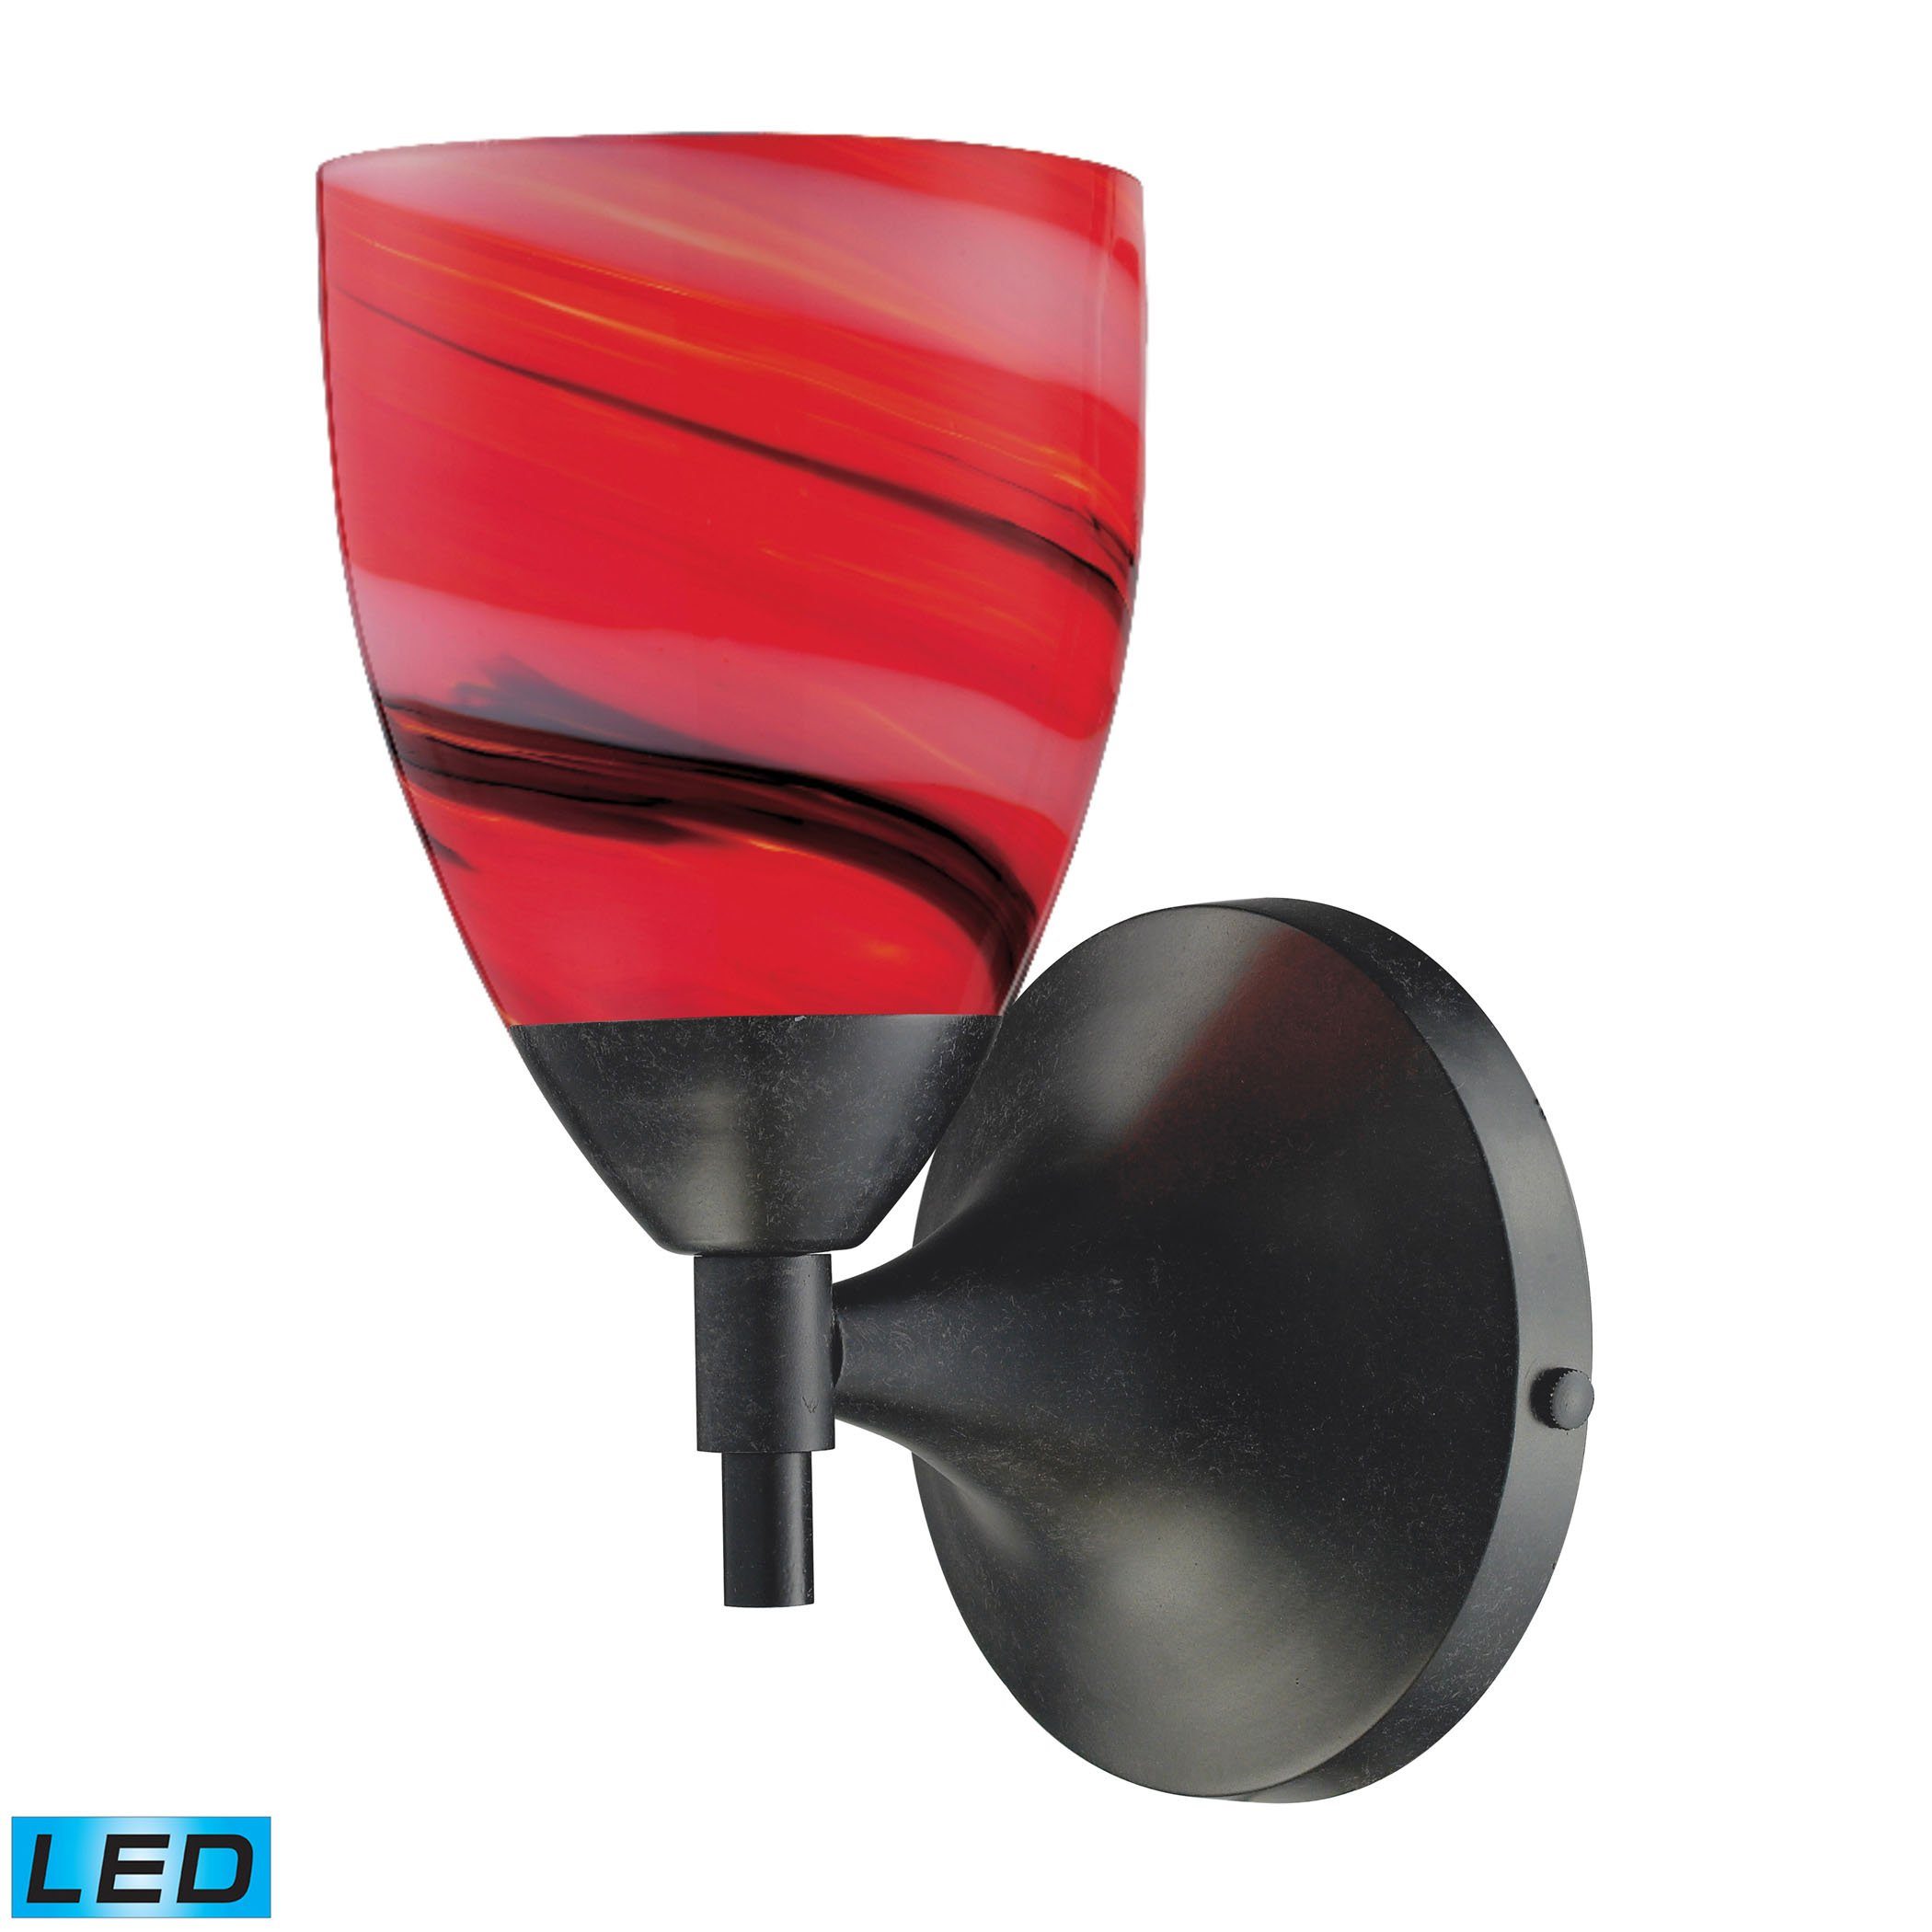 Celina 1 Light LED Sconce In Dark Rust And Candy Glass Wall Sconce Elk Lighting 